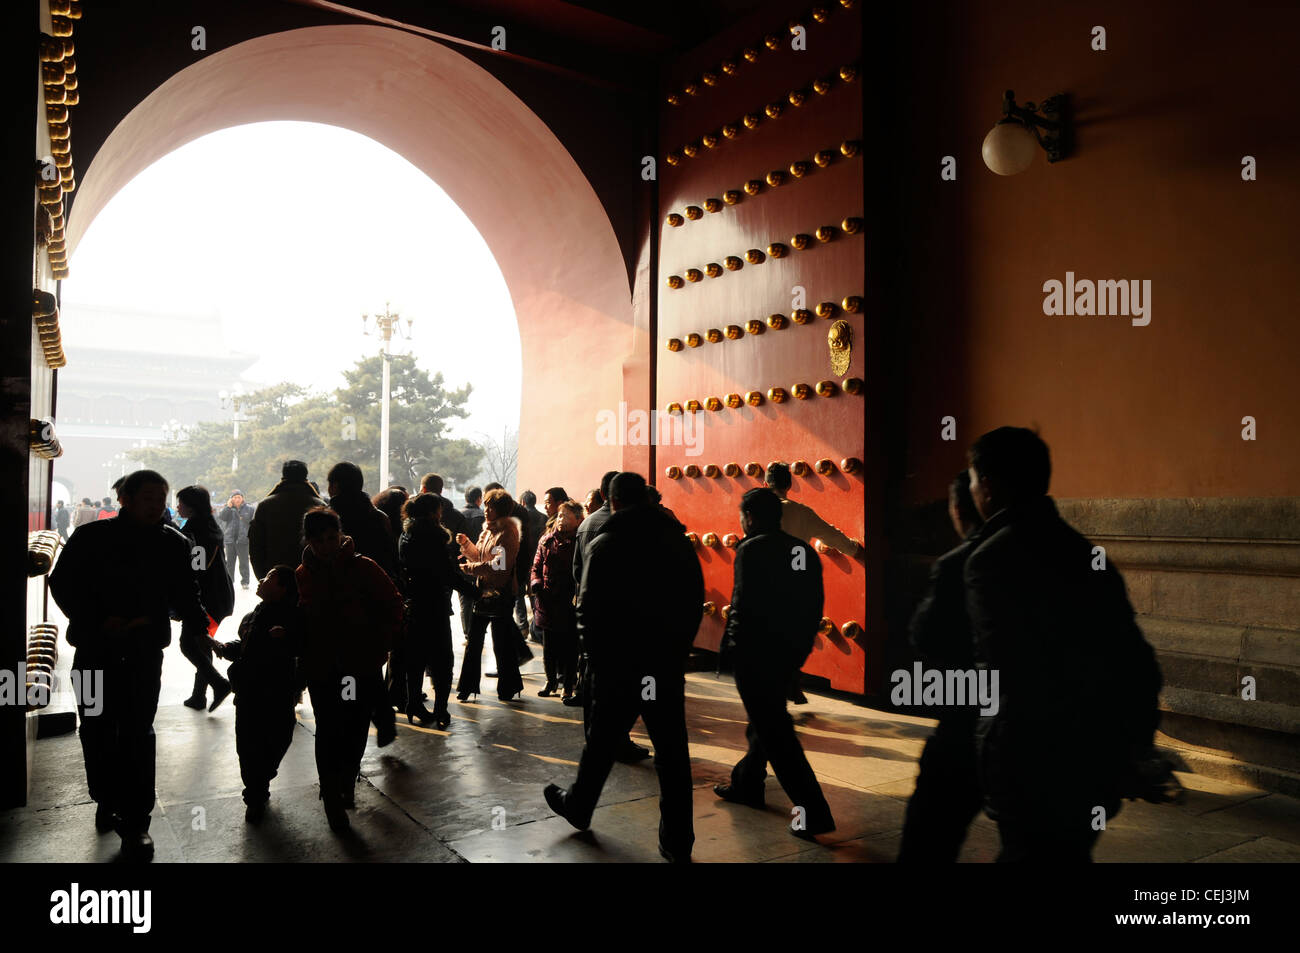 Looking through the Gate of Heavenly Peace towards Tiananmen Square. Beijing, China Stock Photo